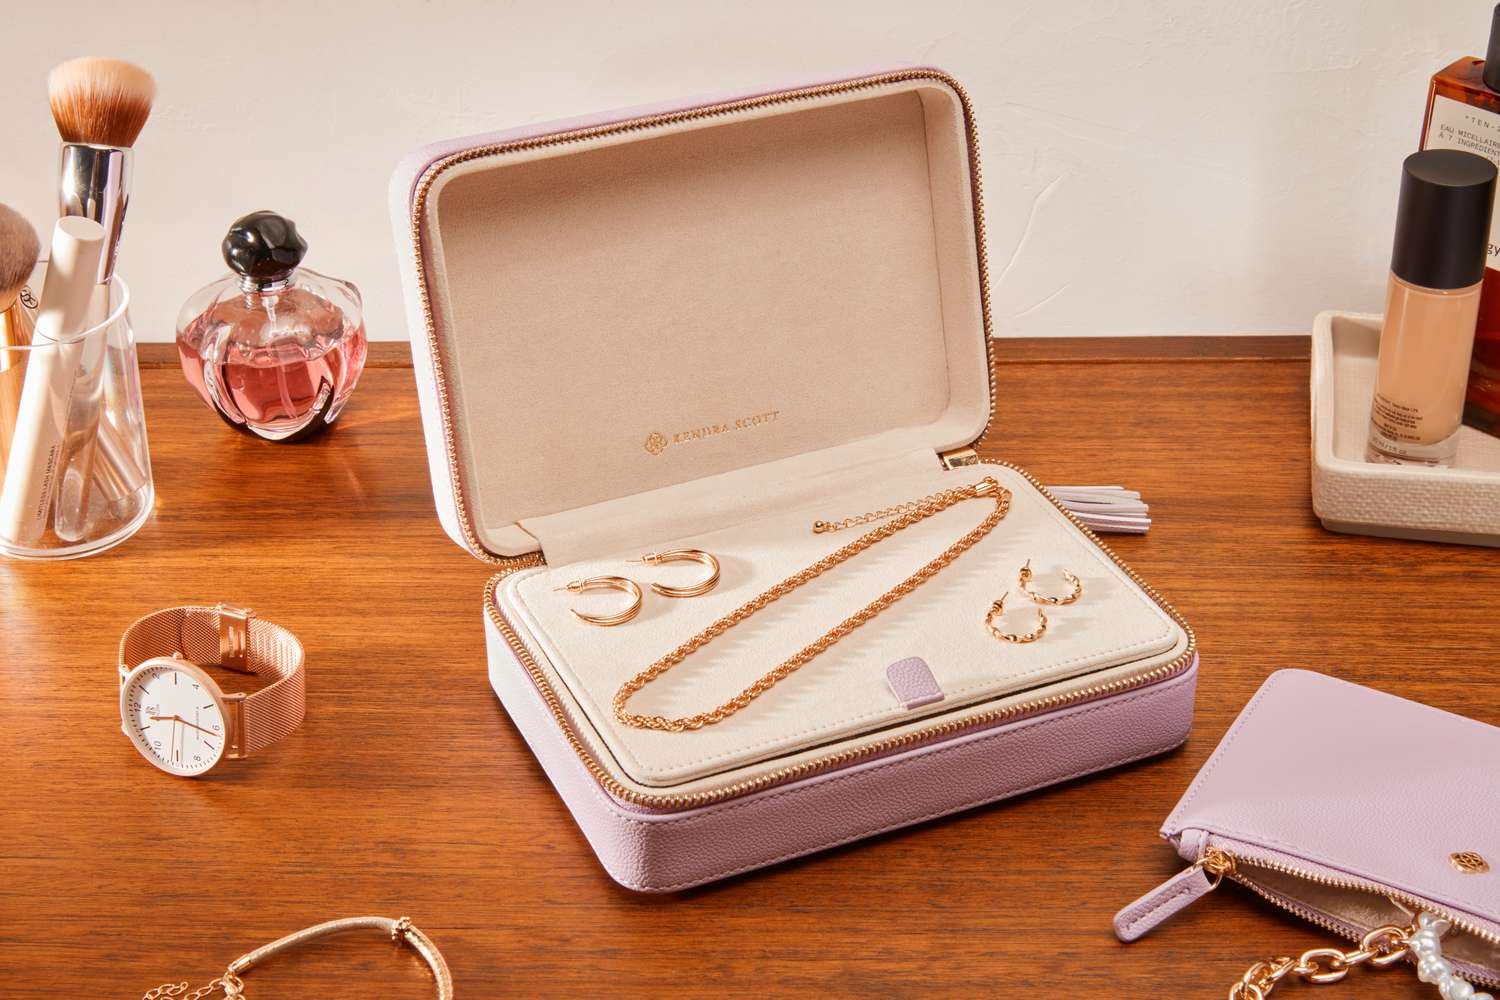 The Kendra Scott Medium Travel Jewelry Case filled with jewelry sitting on a table.